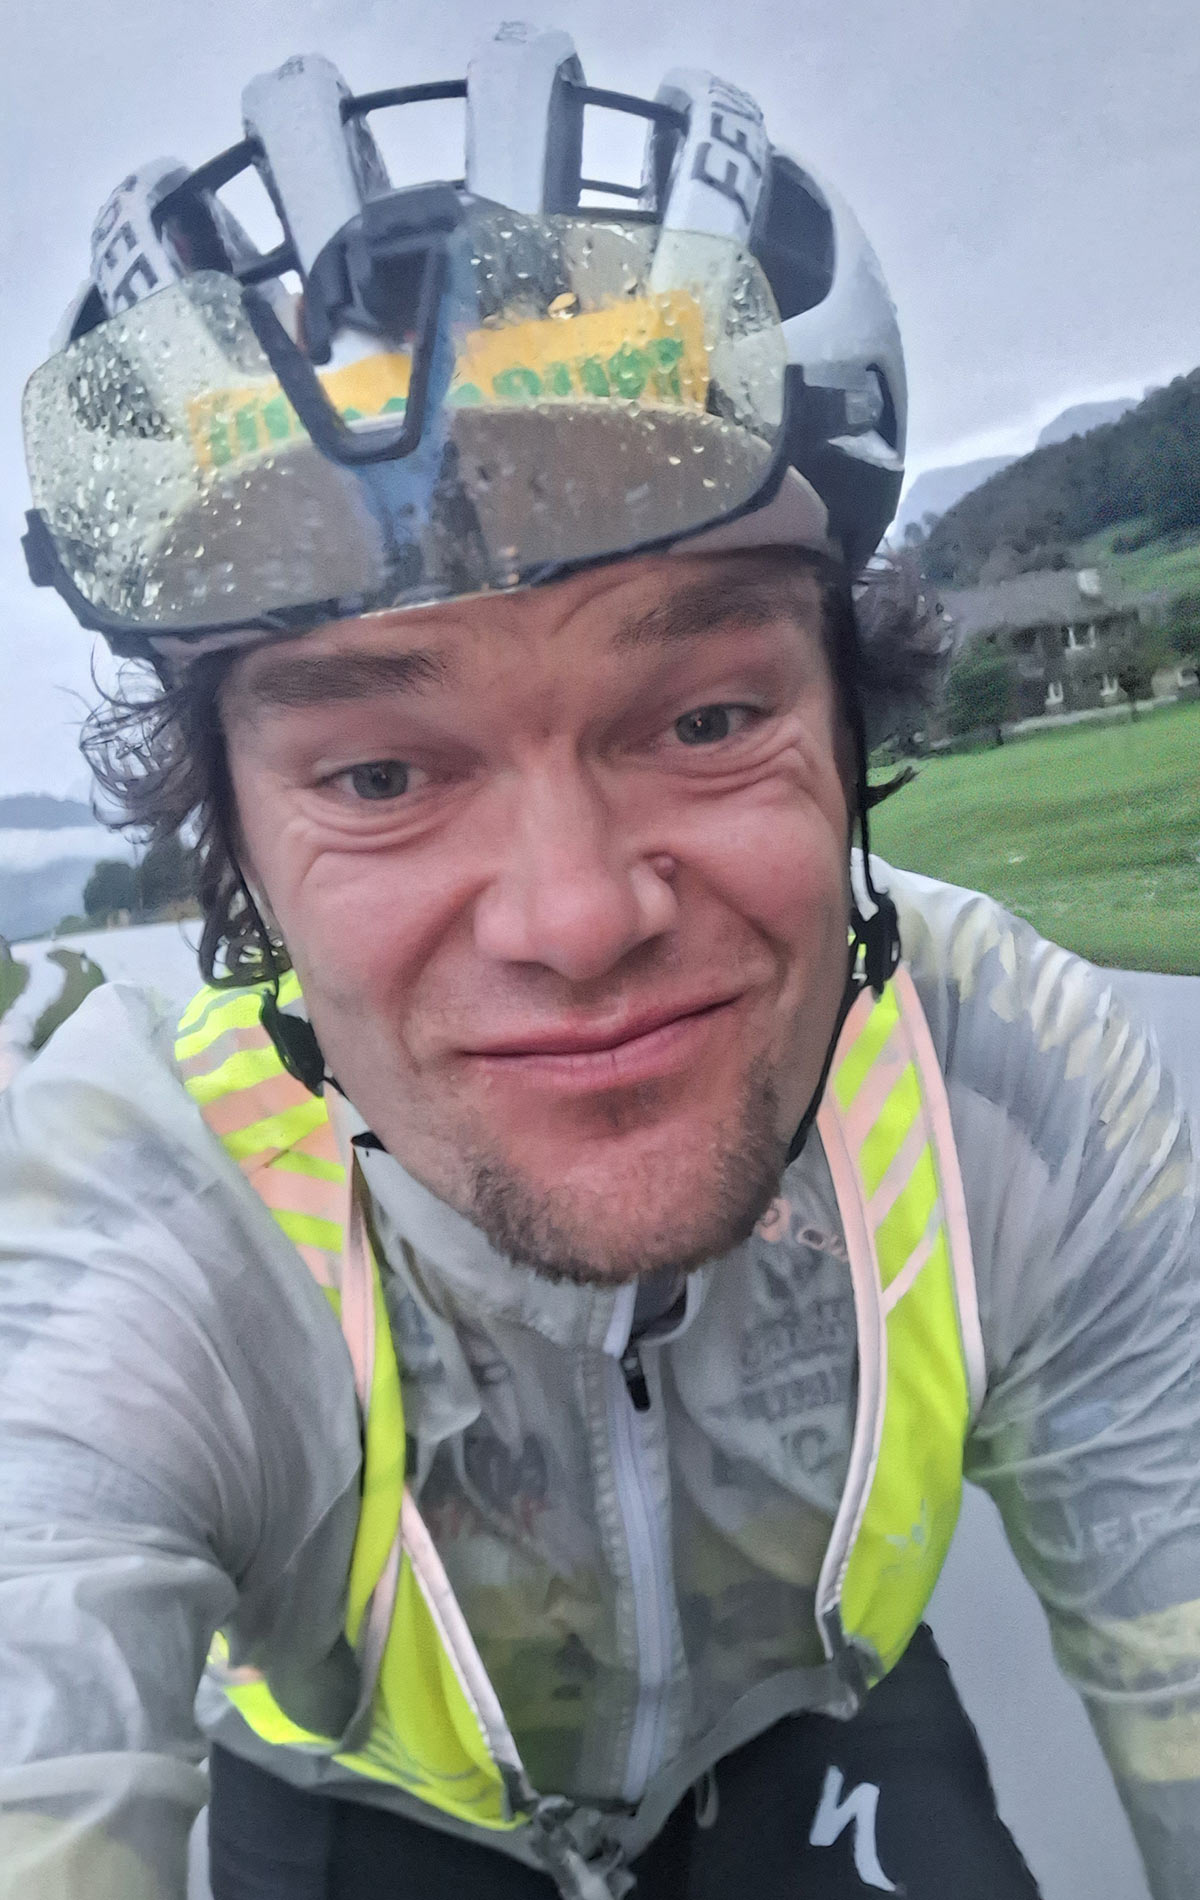 Apidura Packable Visibility Vest, fitted hi-viz vest for road cycling, Christoph Strasser Transcontinental TCRNo9 winner, rainy selfie